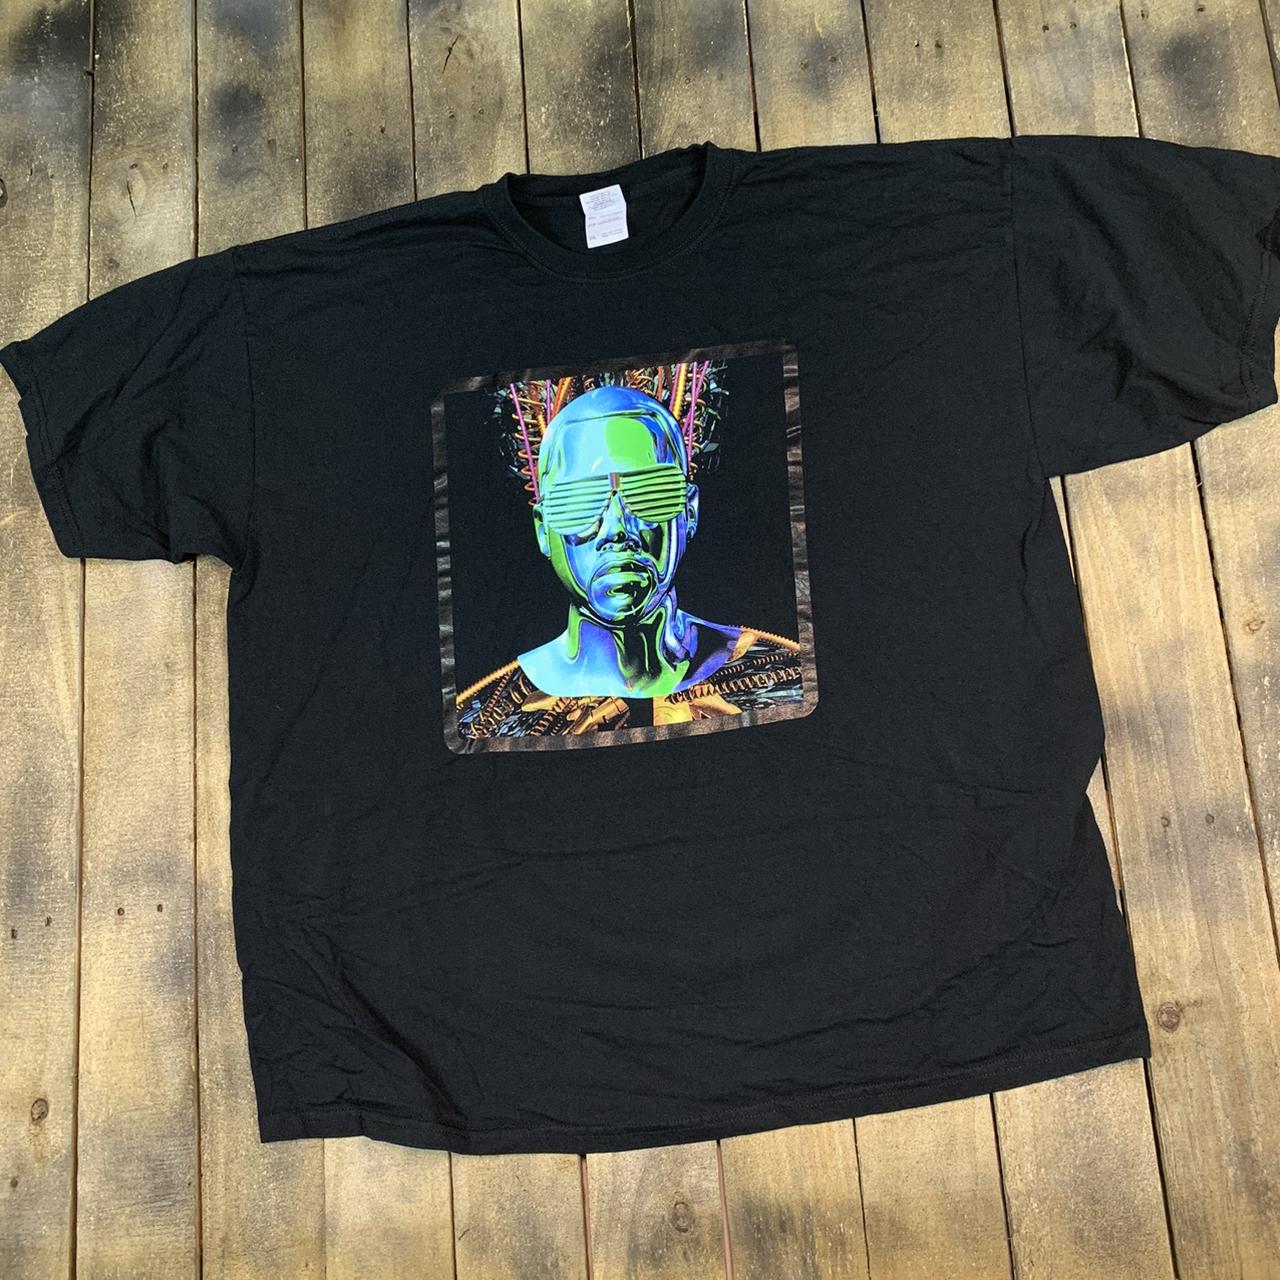 KANYE WEST GLOW IN THE DARK TOUR TEE '07 - Tシャツ